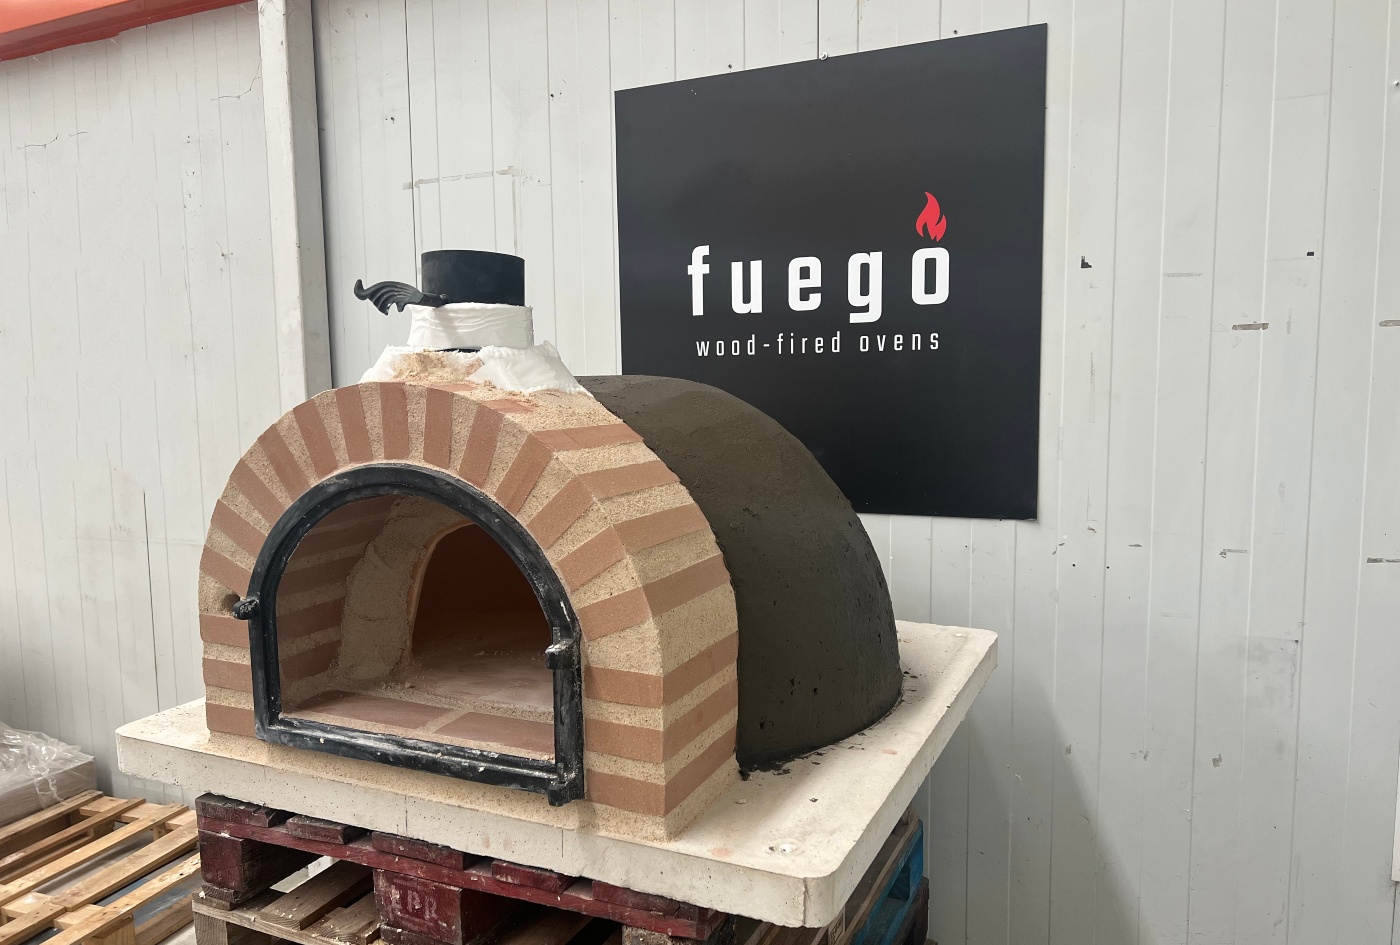 How to insulate a wood-fired pizza oven